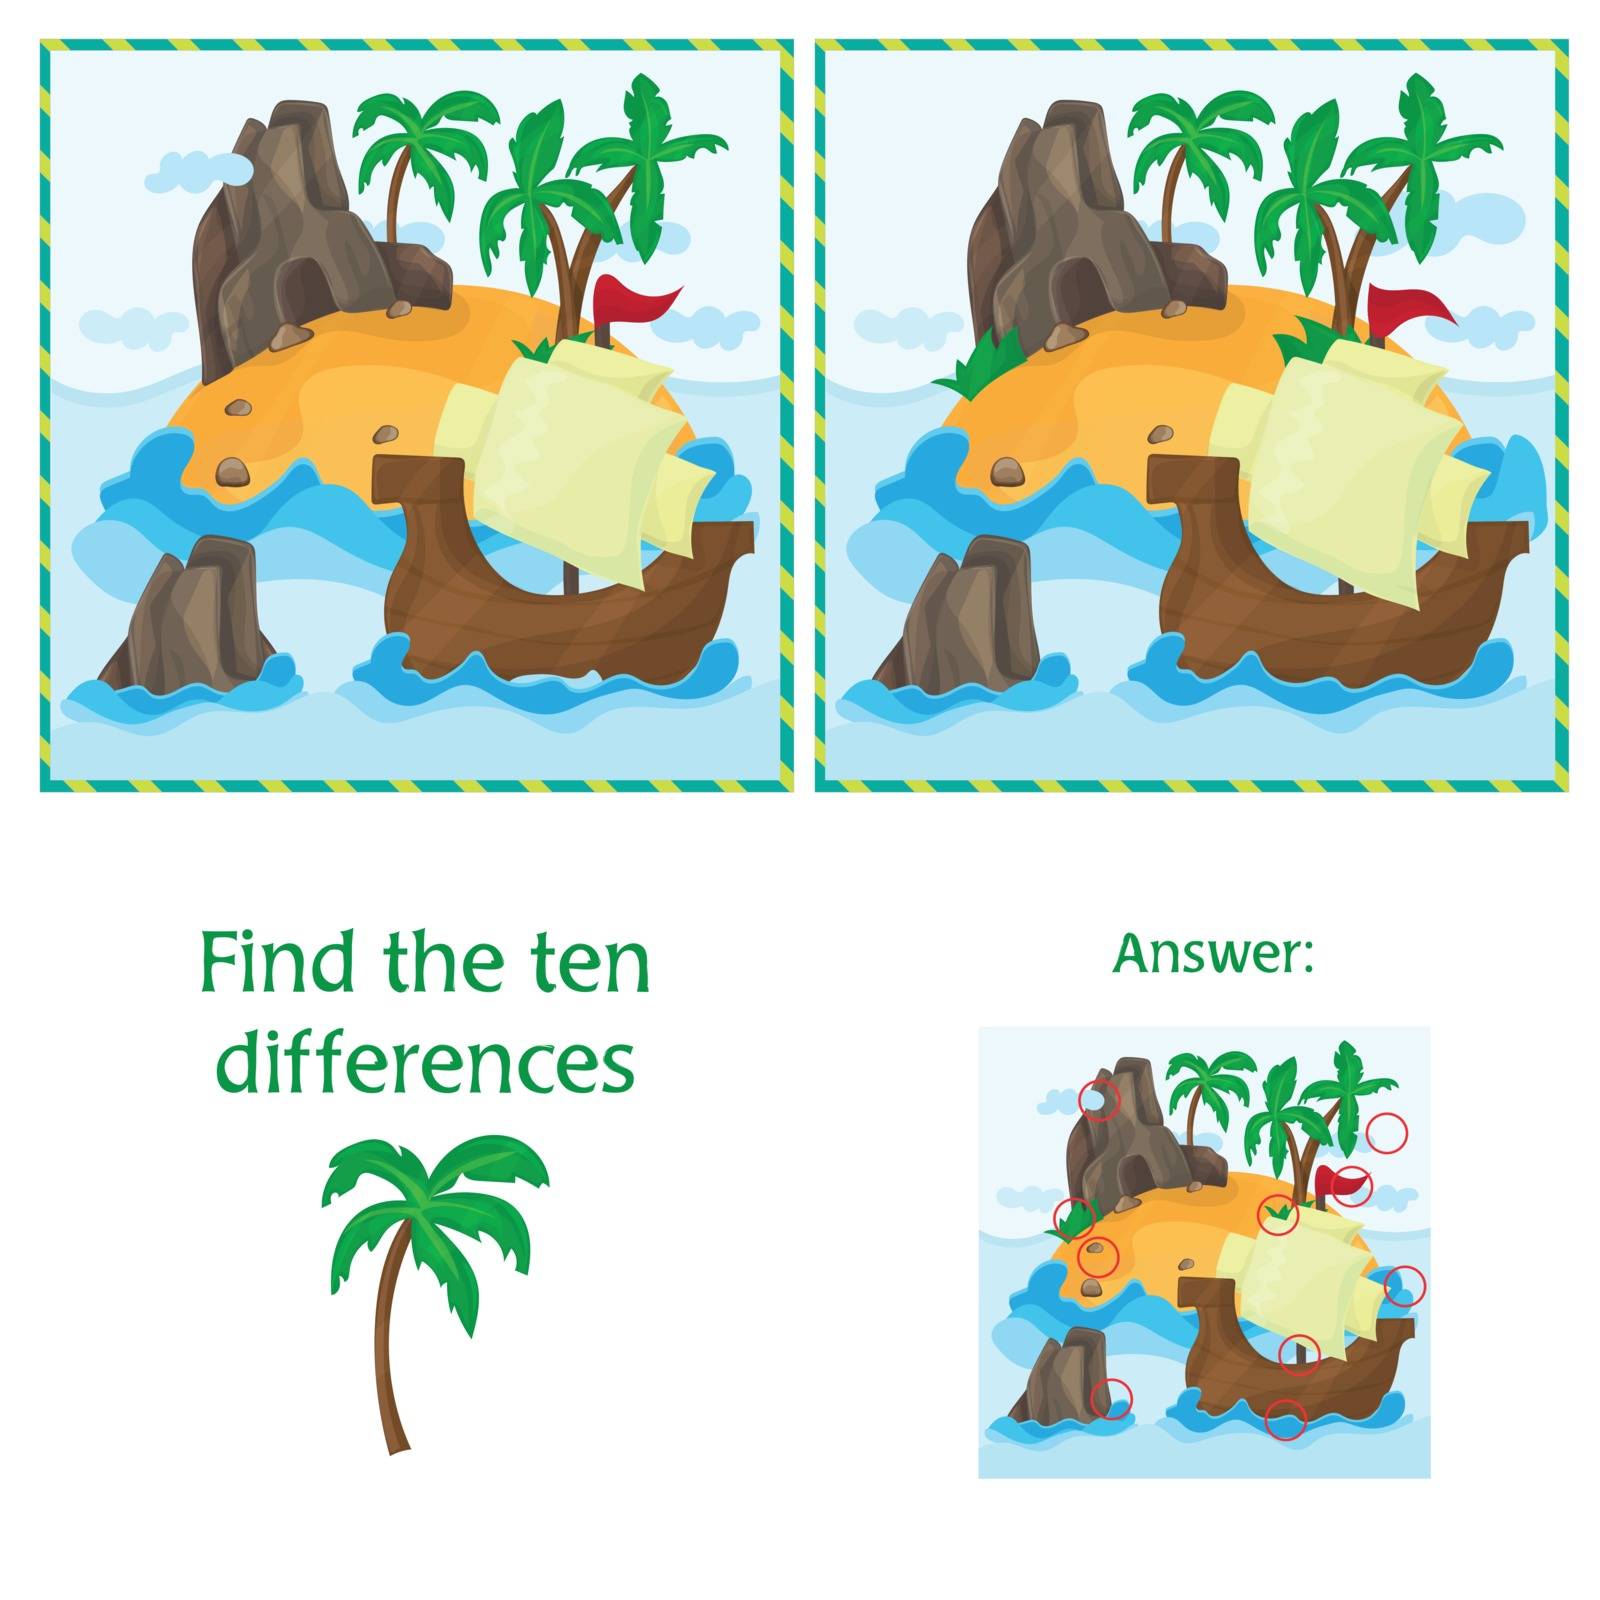 Find the ten differences between the two images with Tropical Island and Ship